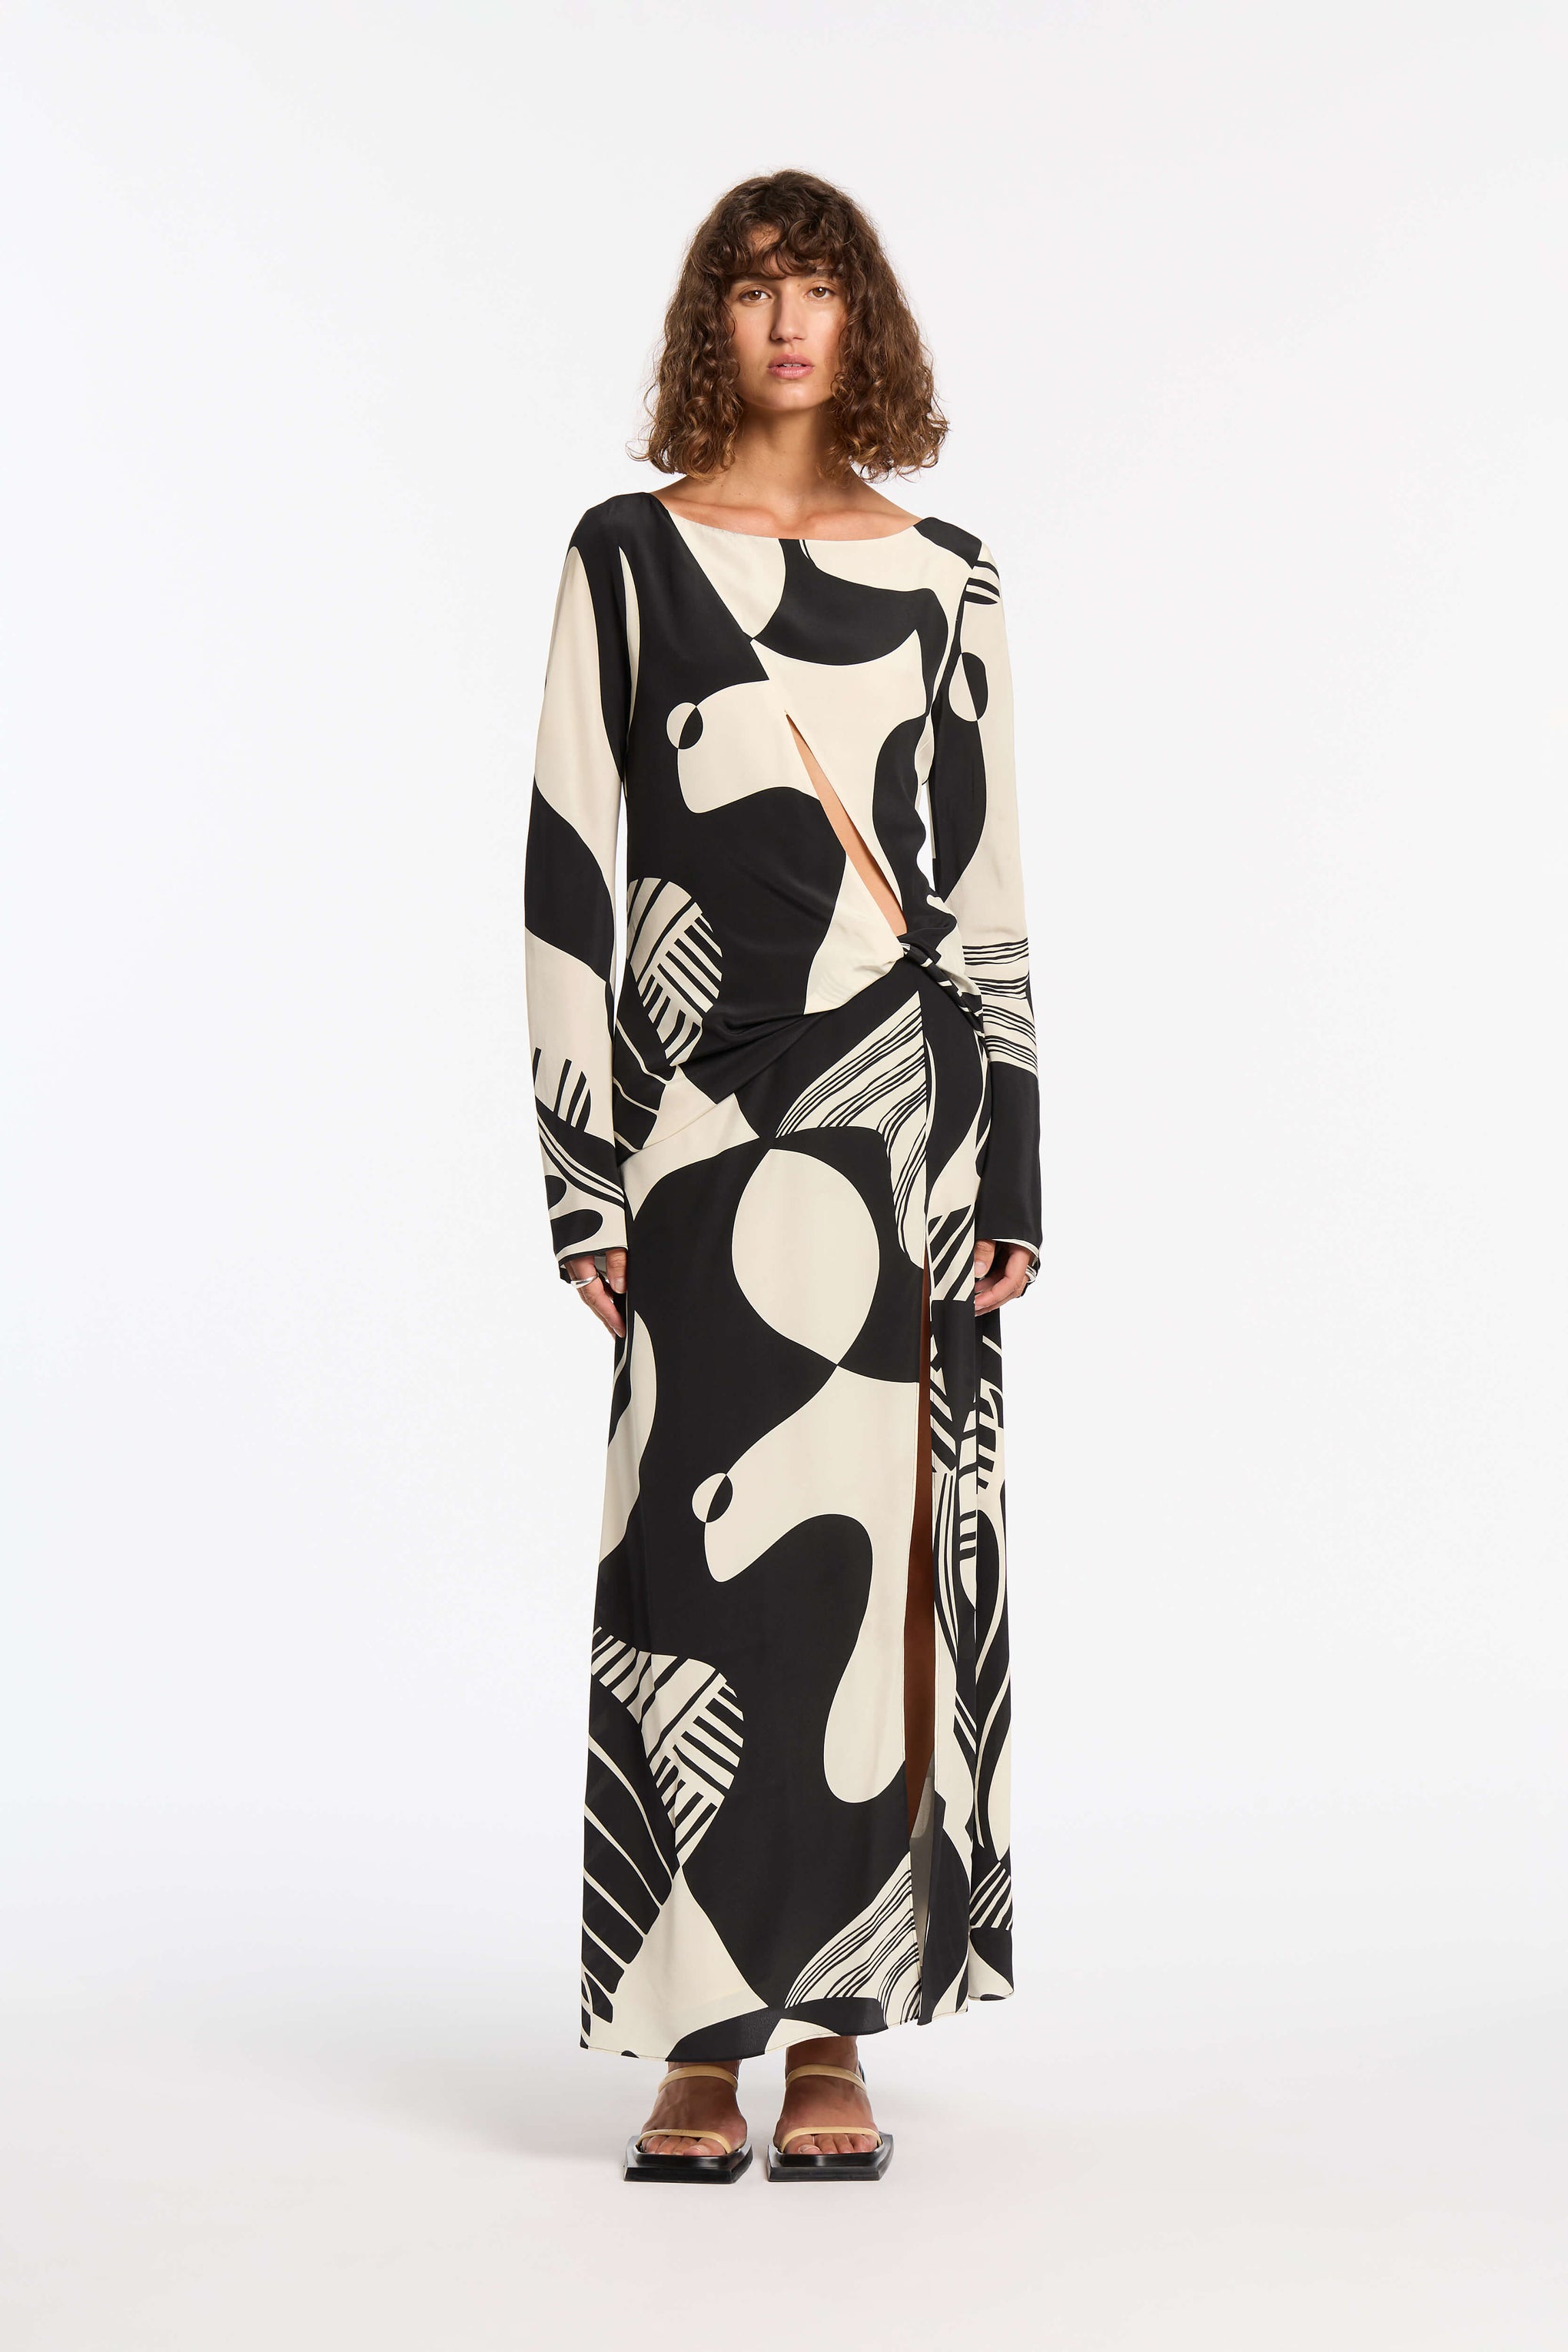 SIR Realisme Twist Maxi Dress in Papier available at TNT The New Trend Australia.